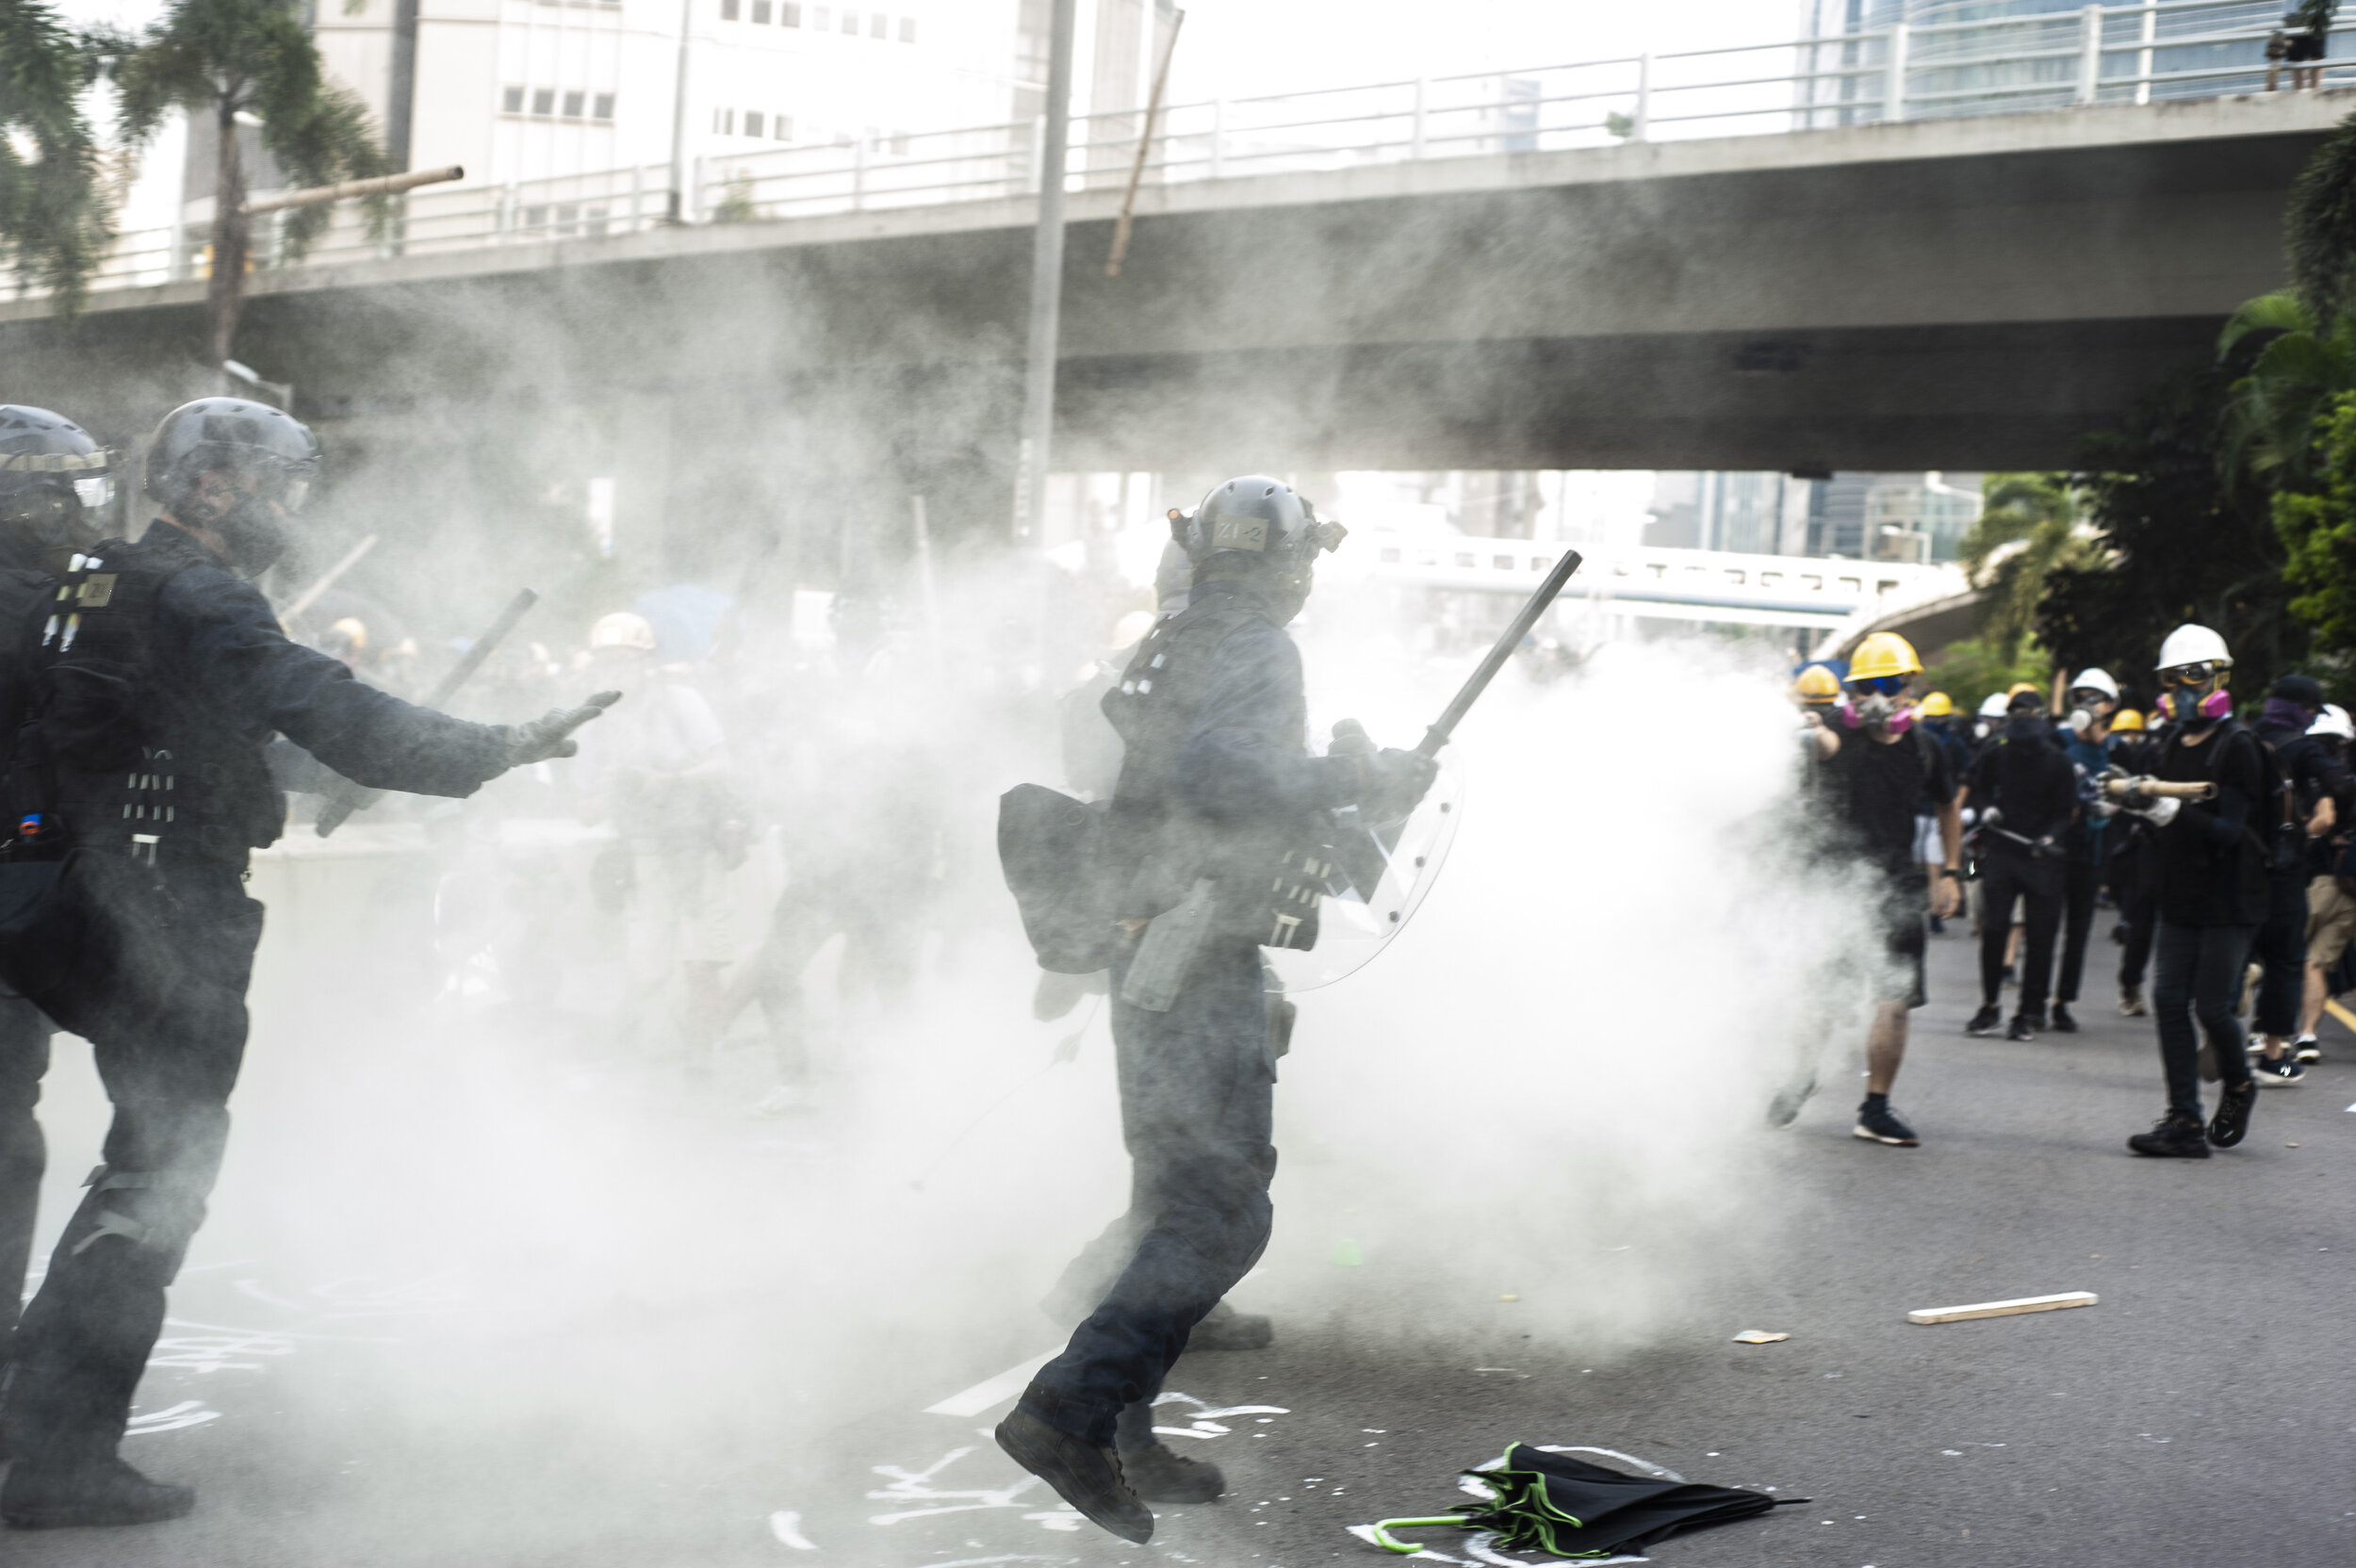  Several police officers retreat briefly after being outnumbered and beat by protesters wielding bats, iron rods, and fire extinguishers during a violent clash in Kwun Tong on August 24, 2019. Following a tense standoff between police and pro-democra